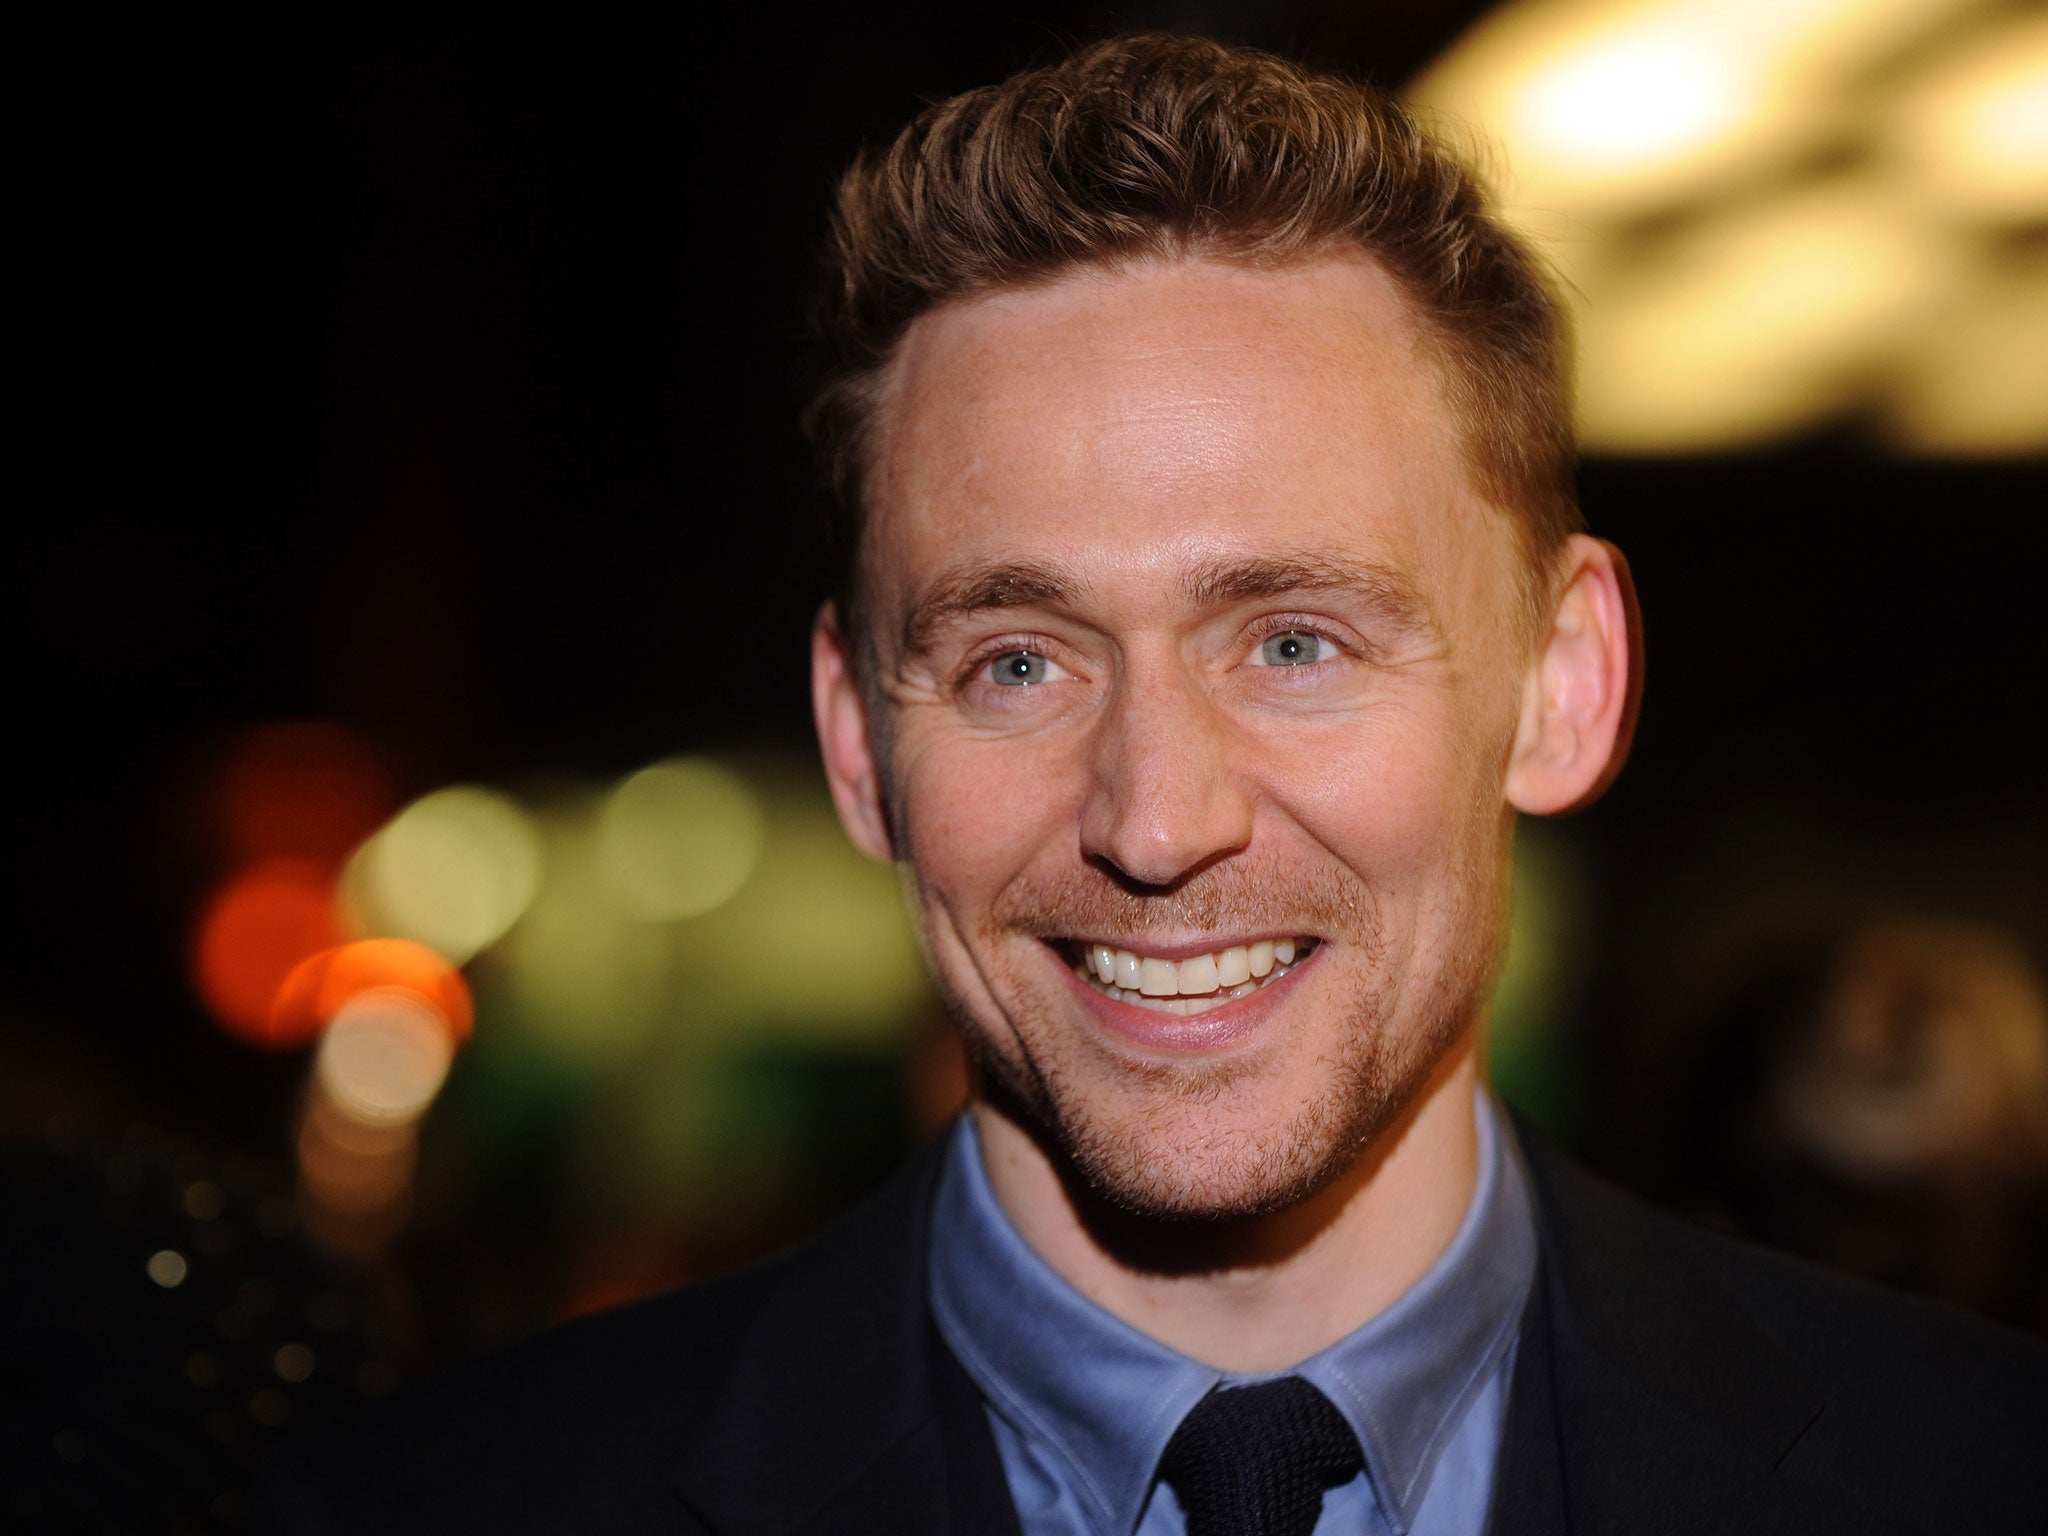 Thor: The Dark World actor Tom Hiddleston has been cast as the lead in a film adaptation of JG Ballard's High-Rise